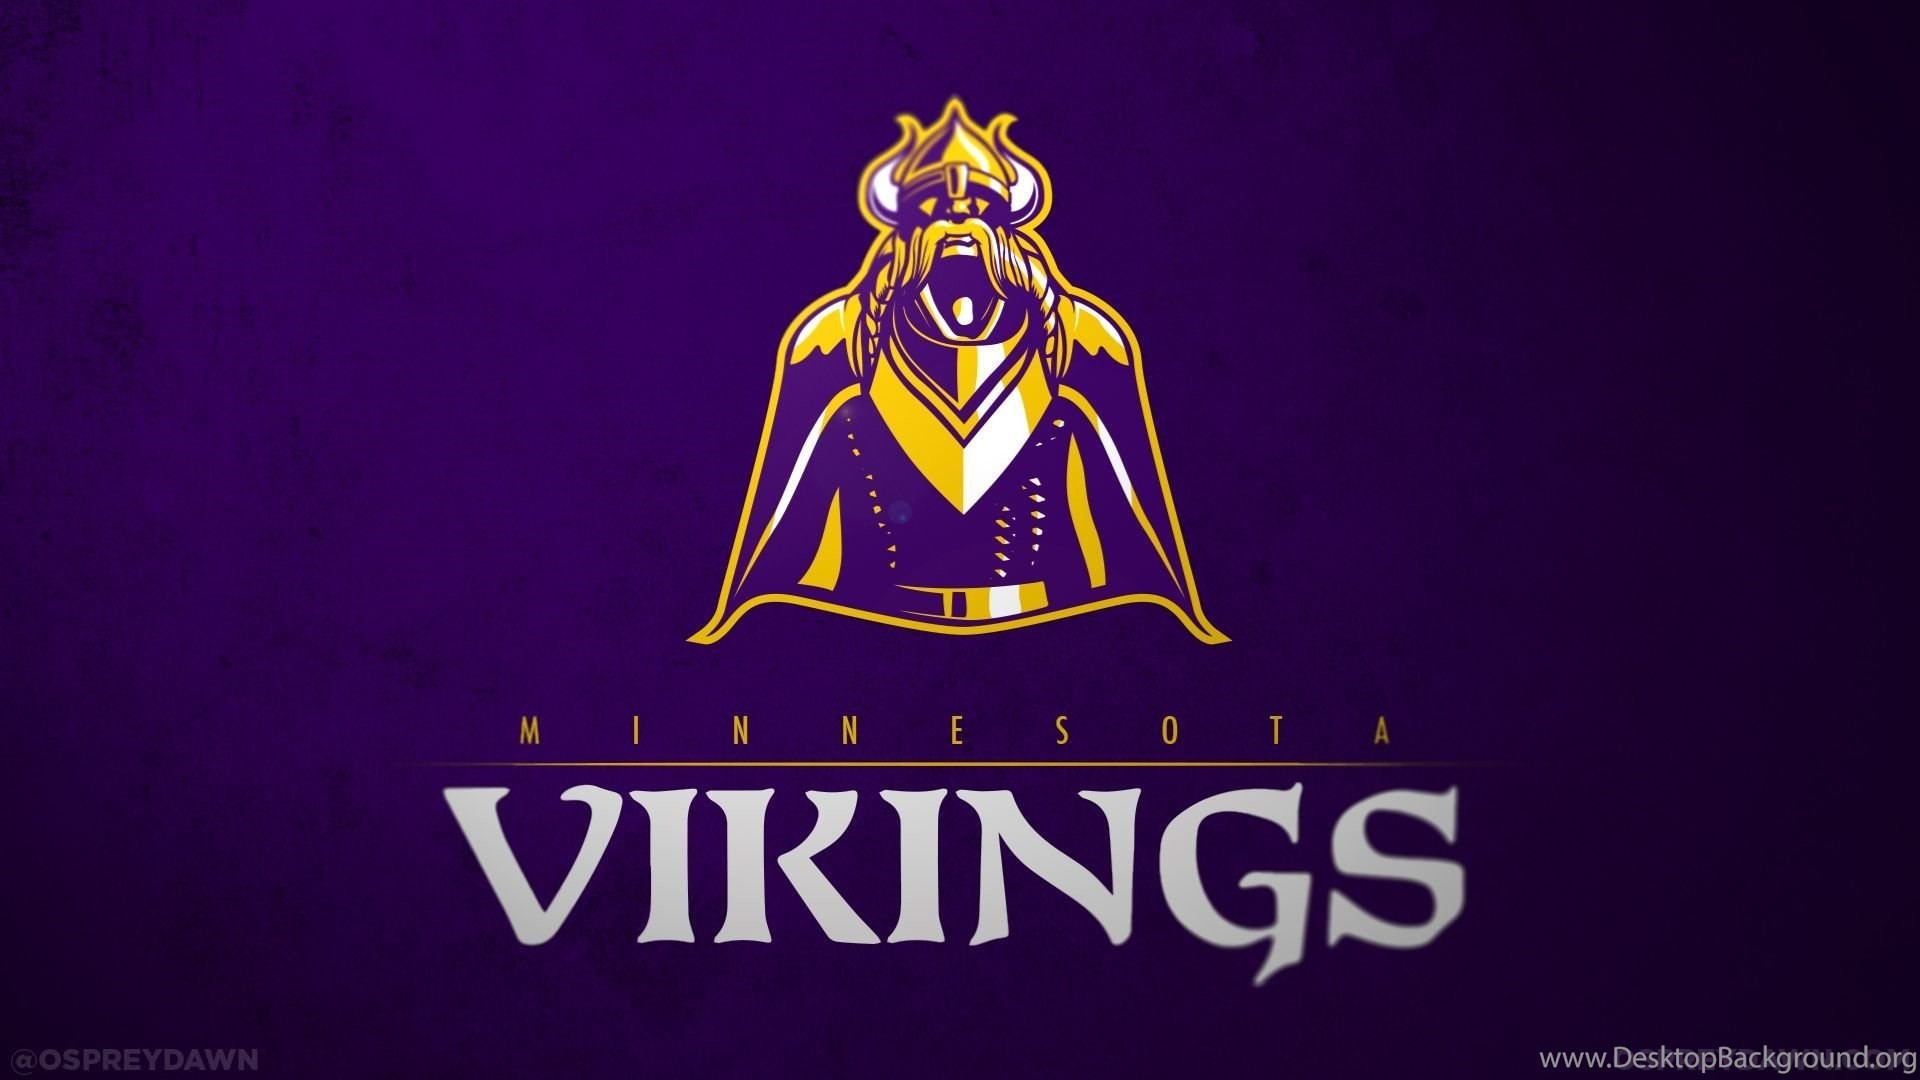 1920x1080 Download Minnesota Vikings Wallpapers For iPhone, Desktop, Laptop, and  Mobile. Therefore you can save them directly to your PC or Phone.